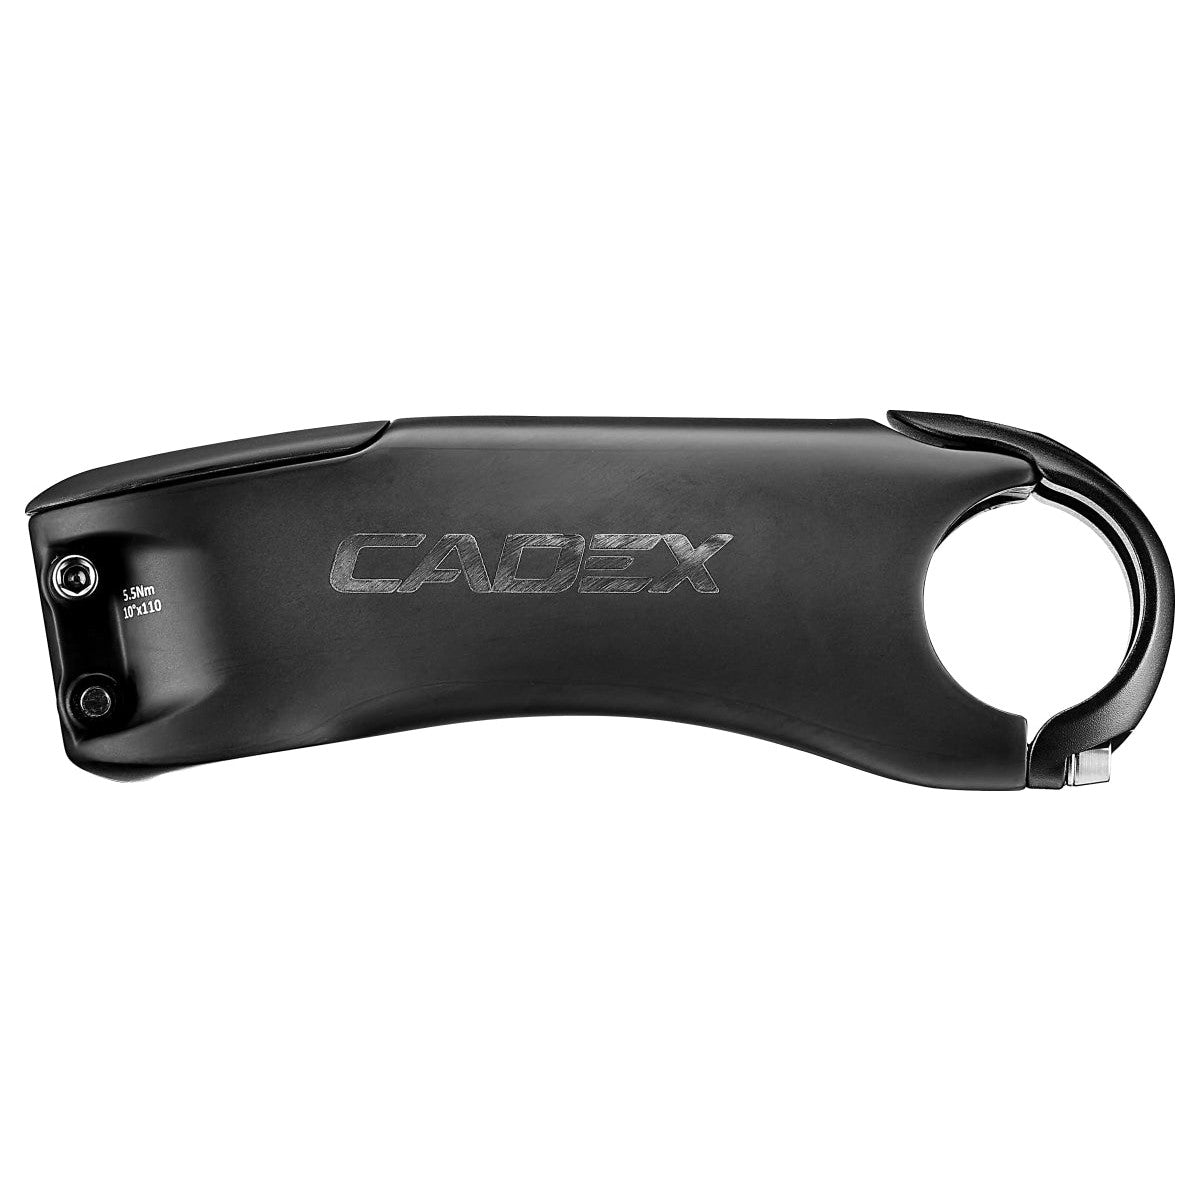 Cadex Race Road 31.8mm Stem - Stems - Bicycle Warehouse